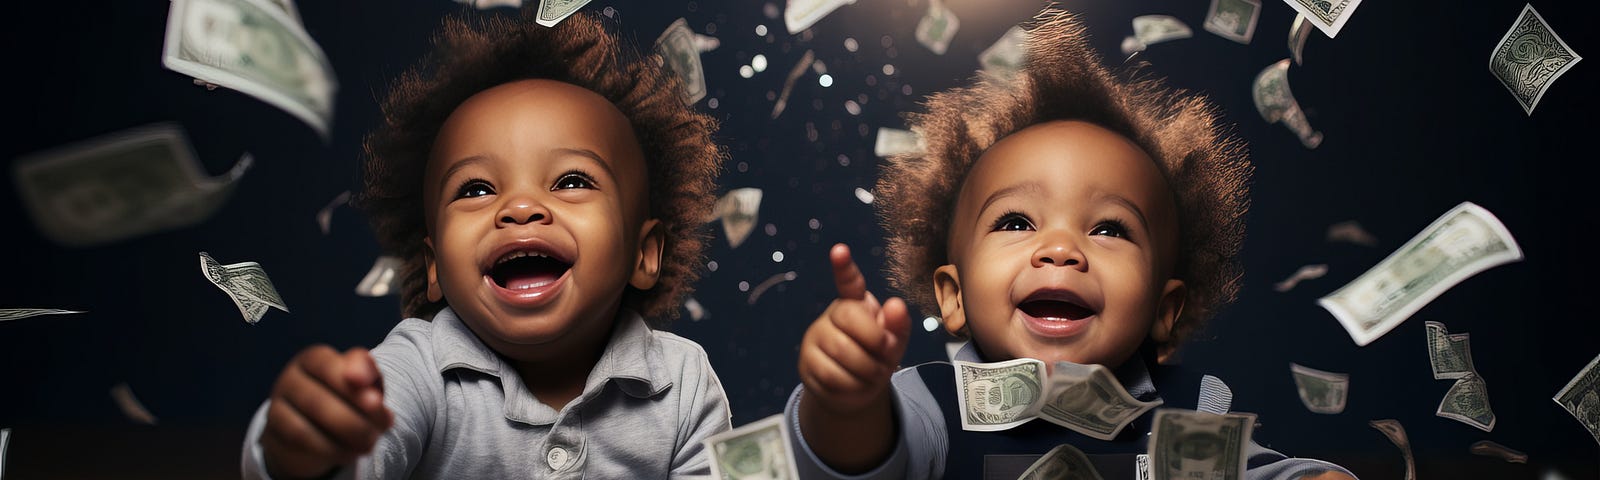 two playful hyperactive cute toddler twins surrounded by money on the floor and in the air